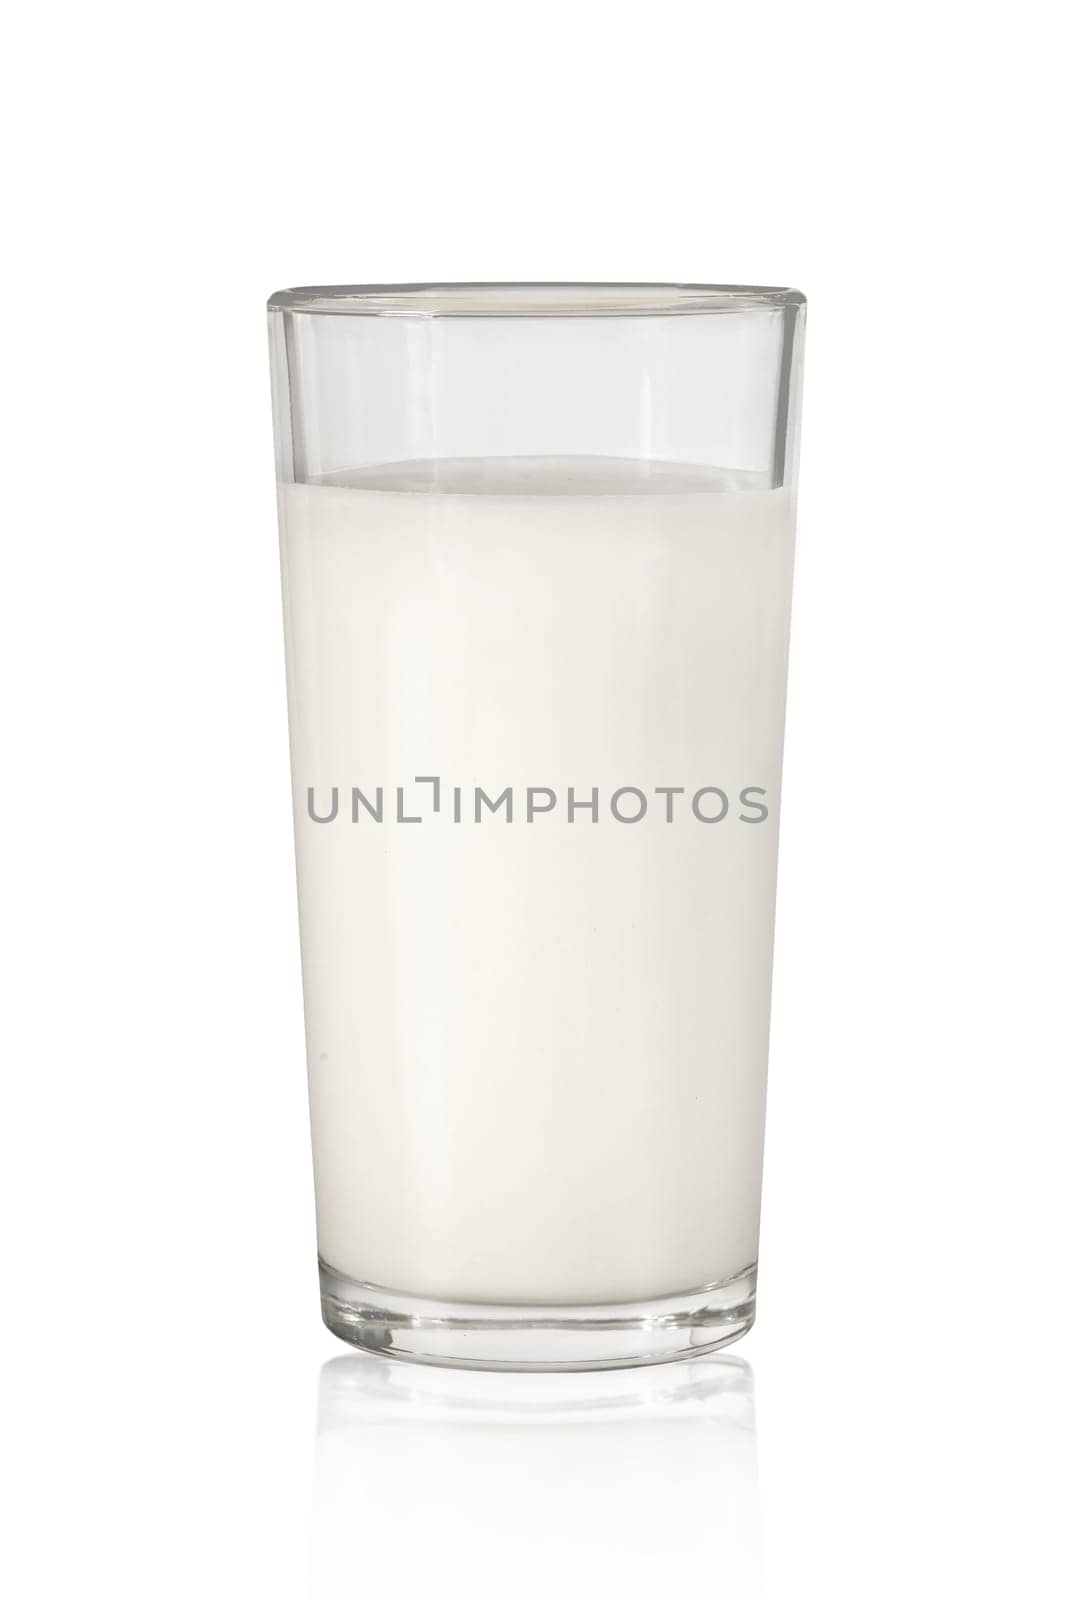 Glass of milk Isolated on a white background. Dairy product, close-up by Shablovskyistock